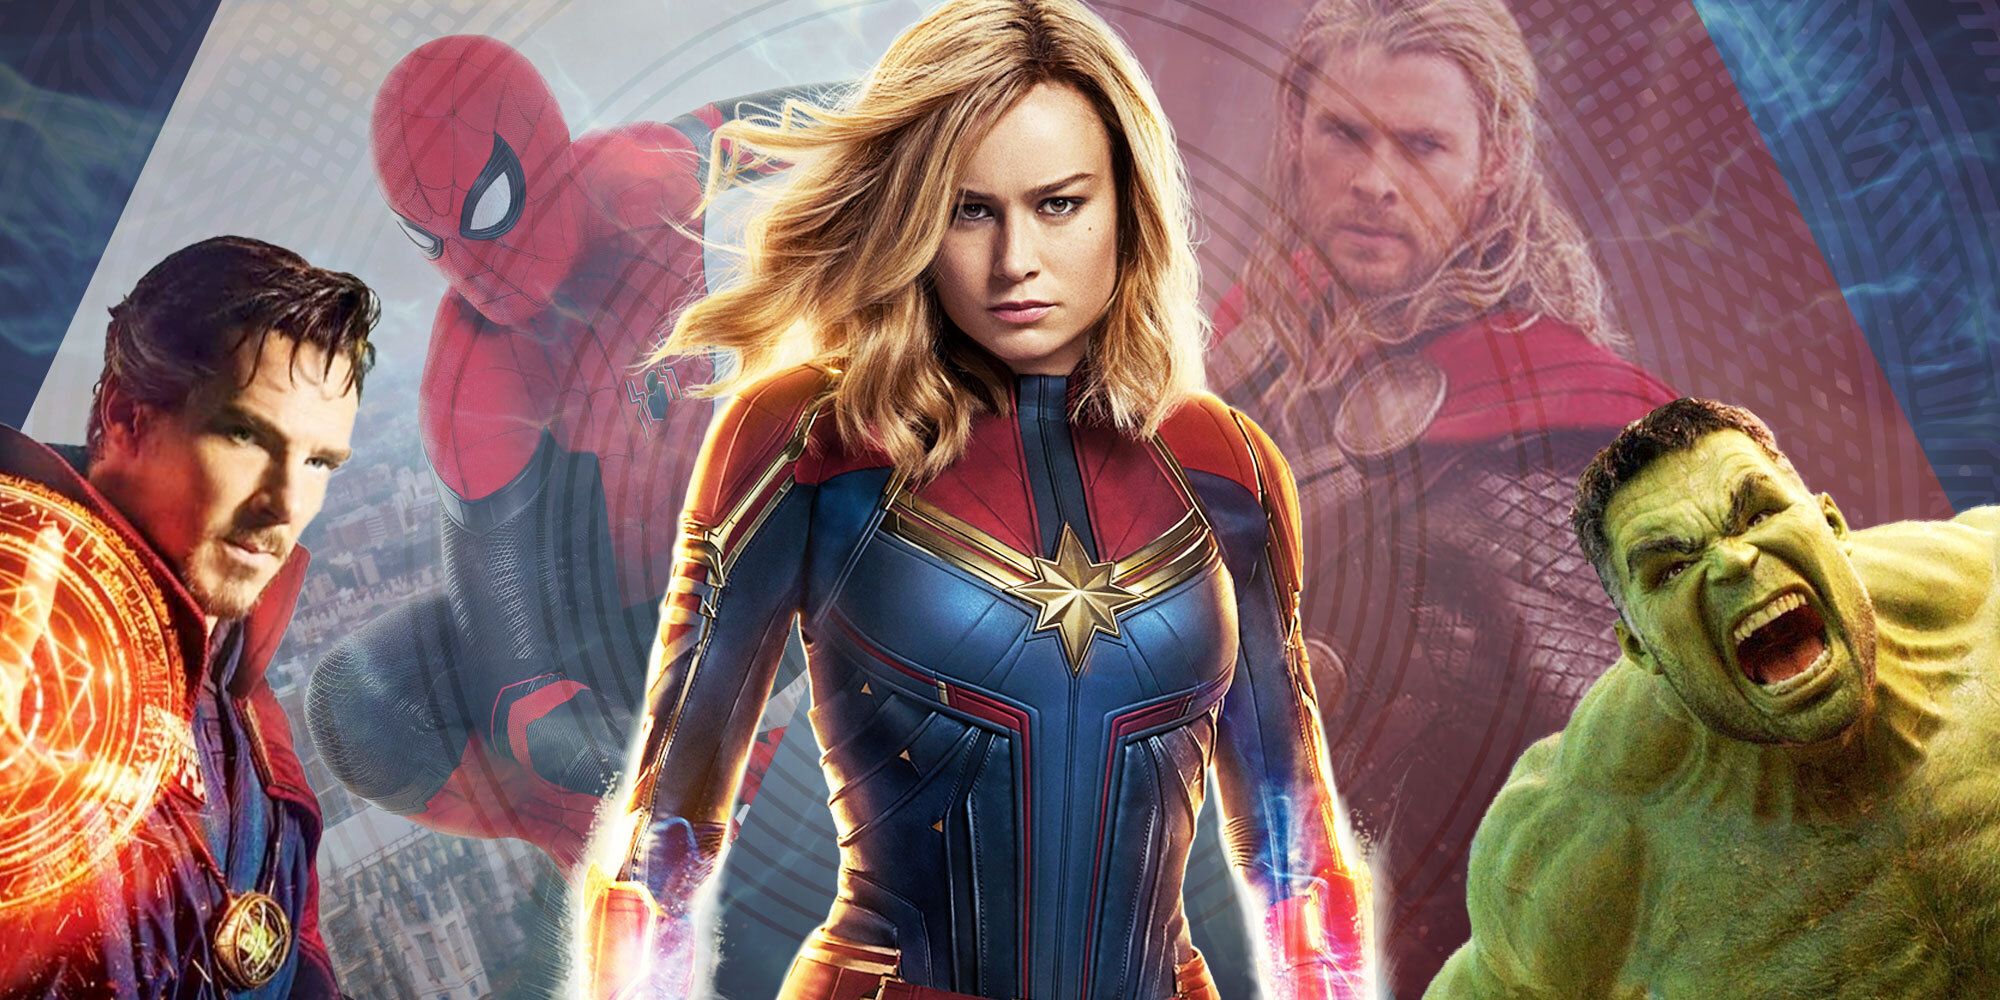 Release Dates for Every Upcoming Marvel MCU Movie and TV Show